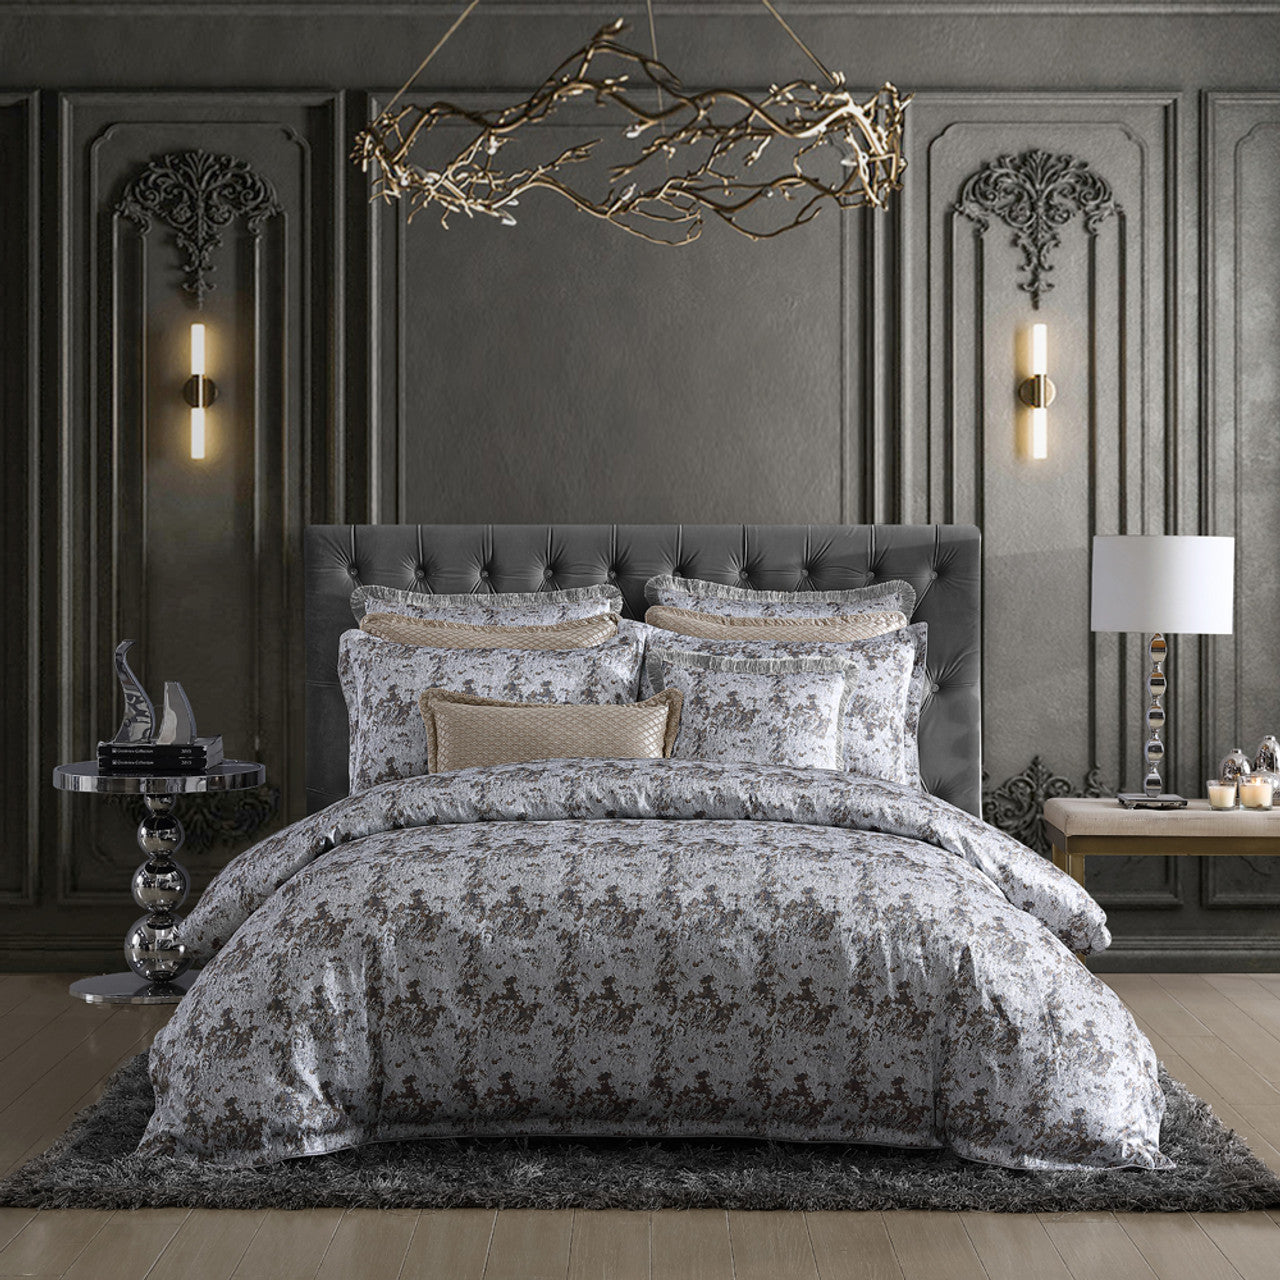 The Davinci Trieste Silver Bed Quilt Cover Set epitomizes modern luxury. Its jacquard weave seamlessly integrates metallic threads, creating a radiant shimmer and understated allure. The quilt cover and pillowcases are skillfully crafted with self-flanged edges, accentuated by cord piping, showcasing elegant tailoring. 